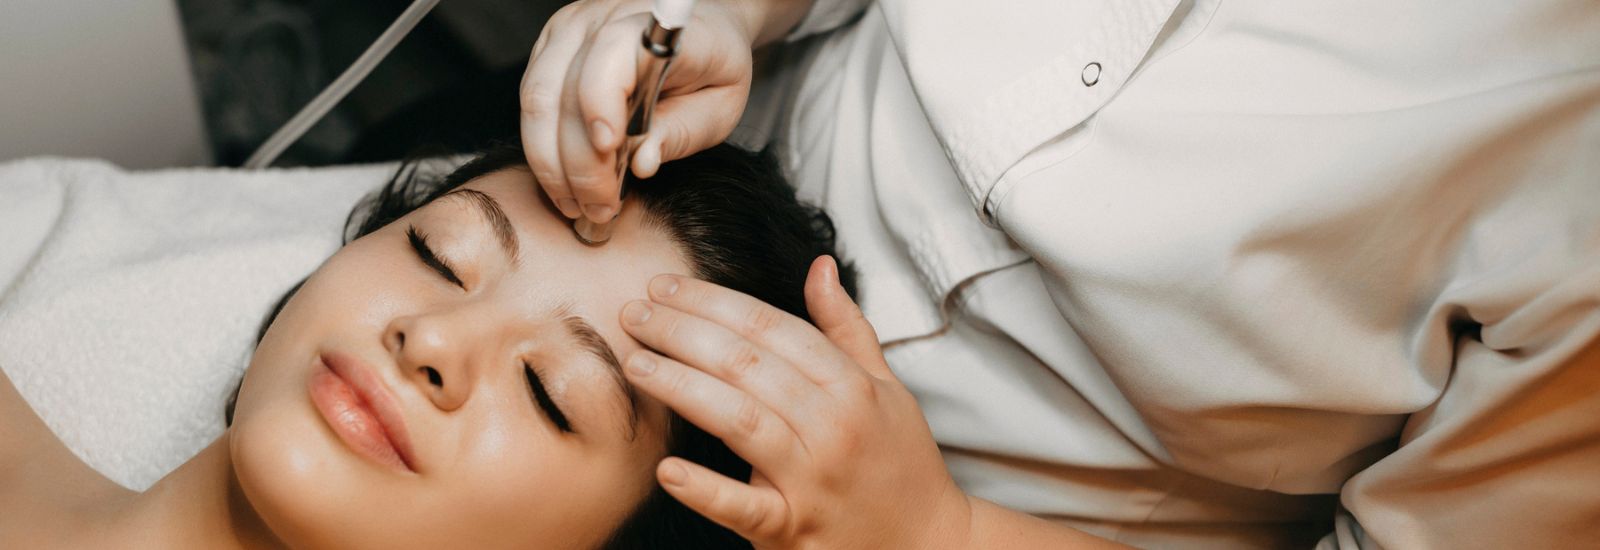 Microneedling For Acne Scars: Is This The Best Solution?